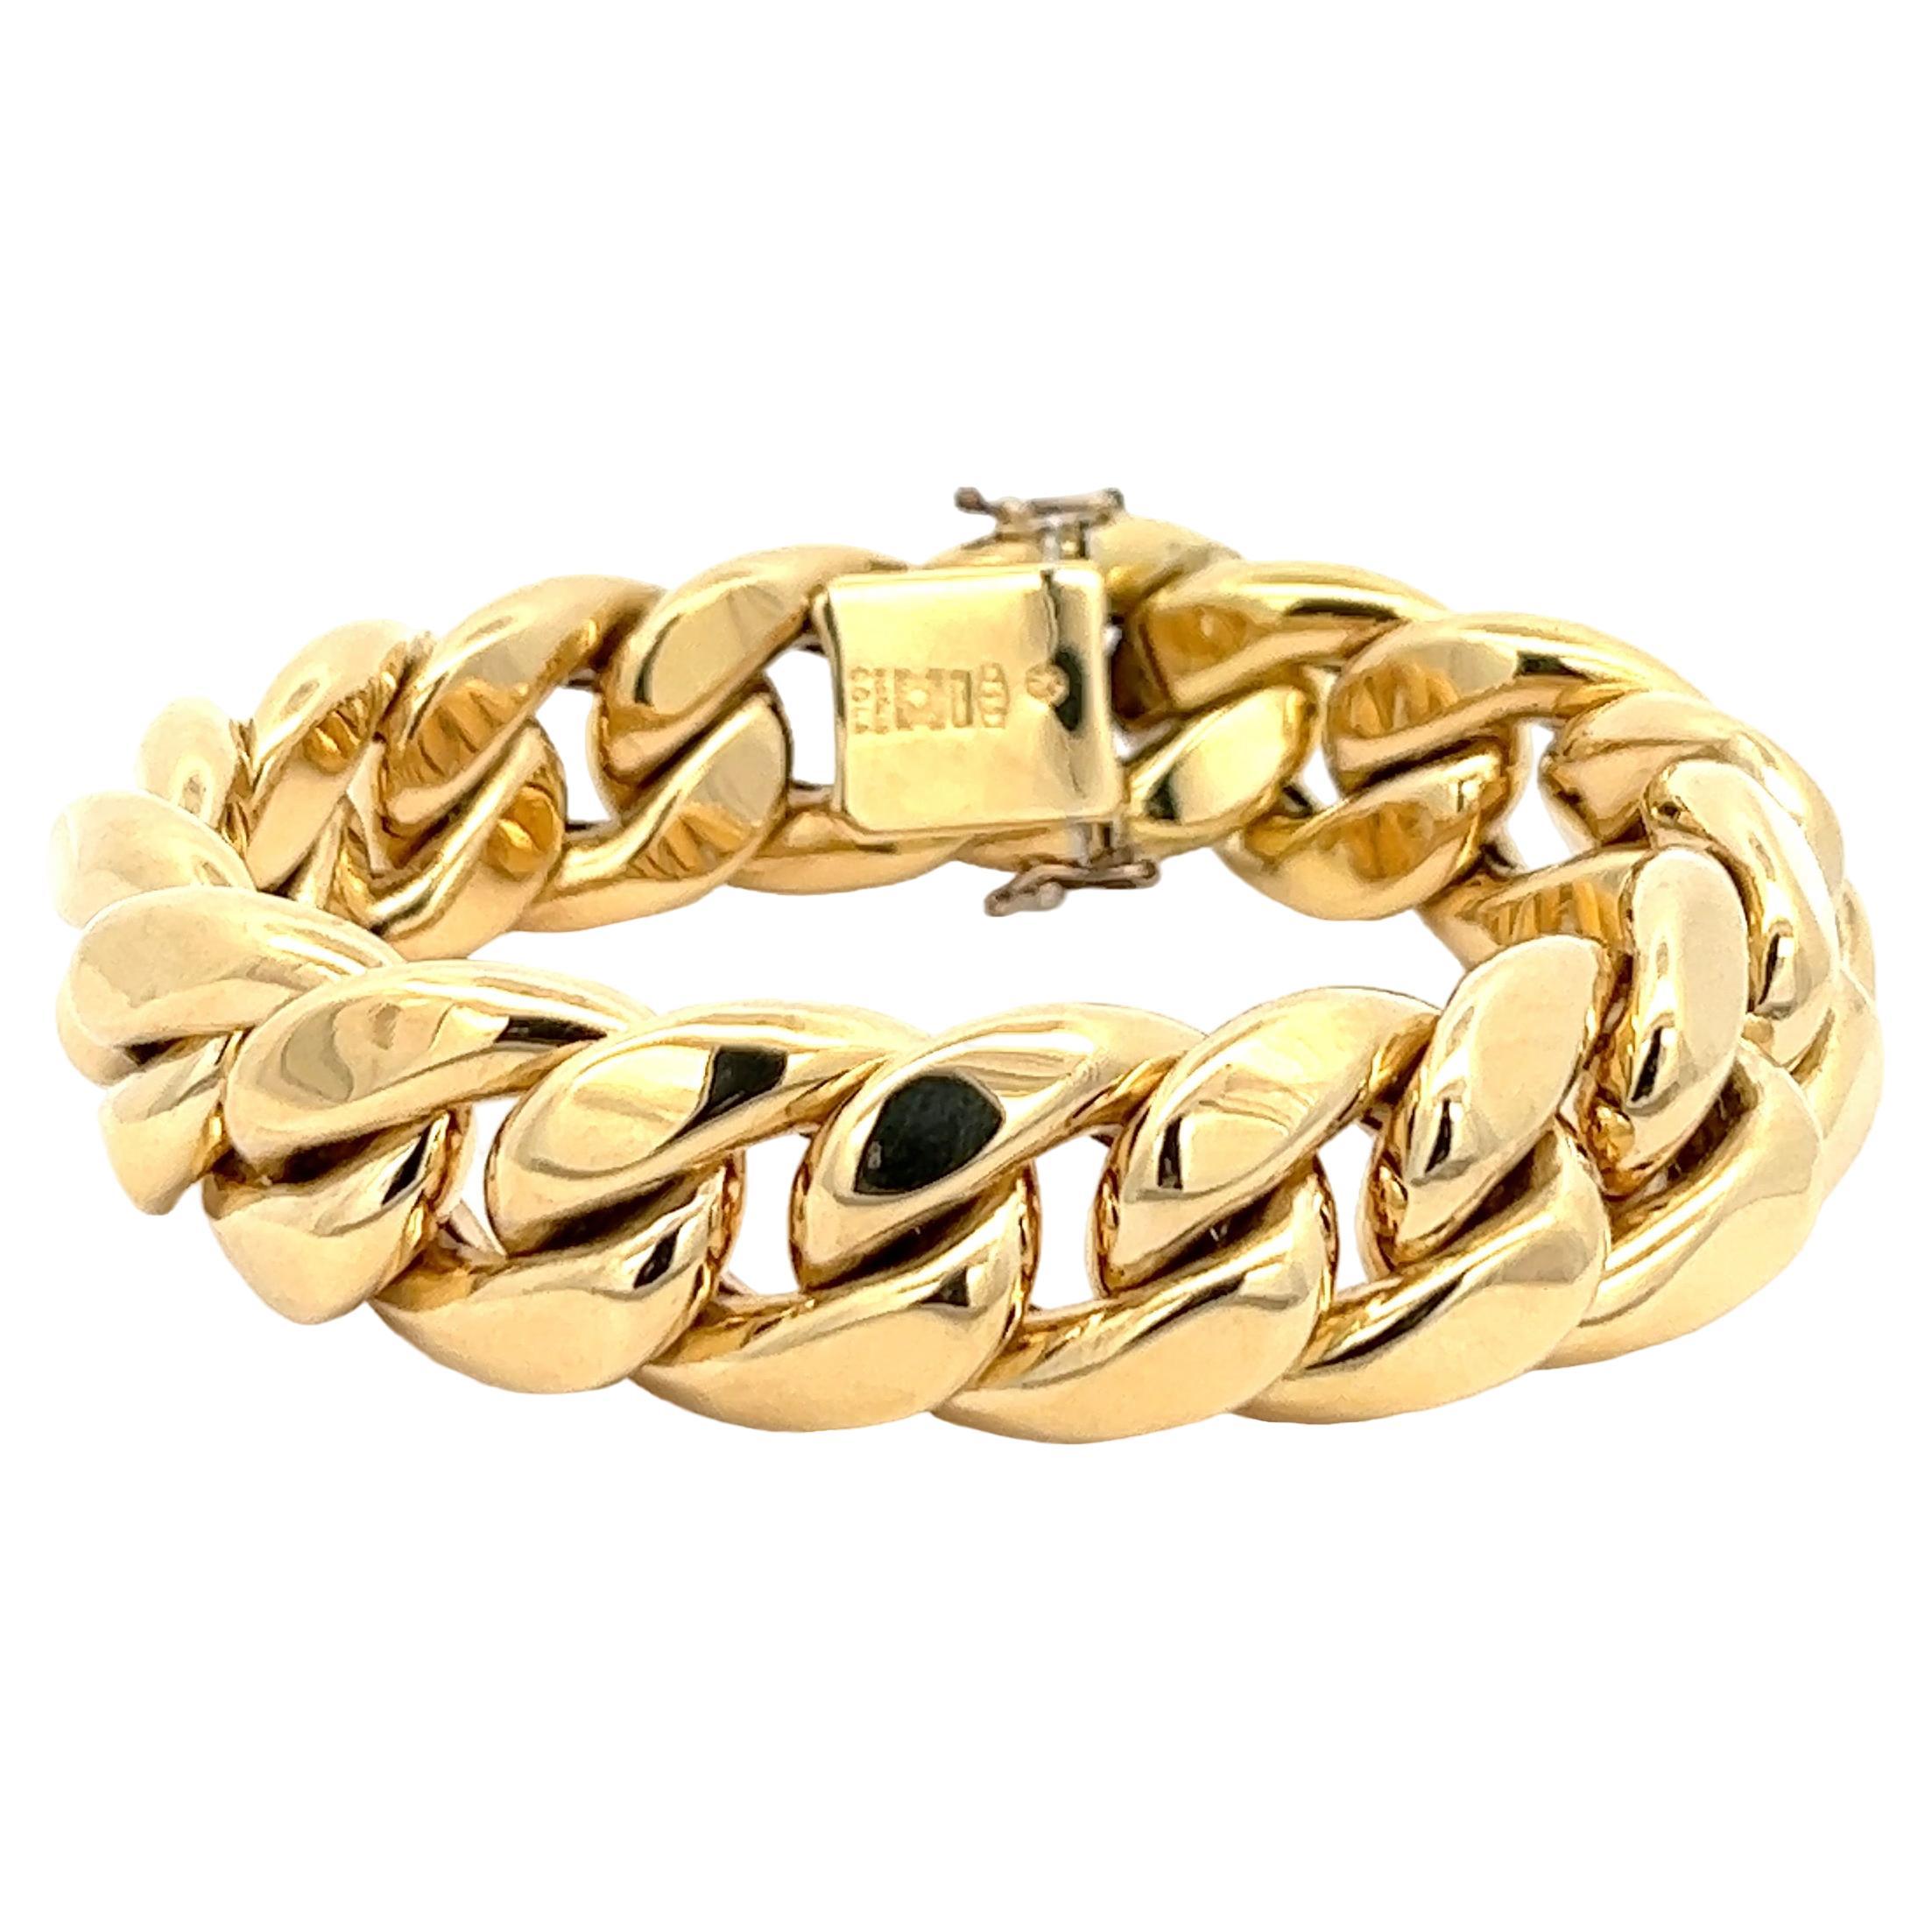 An 18k yellow gold bracelet by Nicolis Cola. For Sale